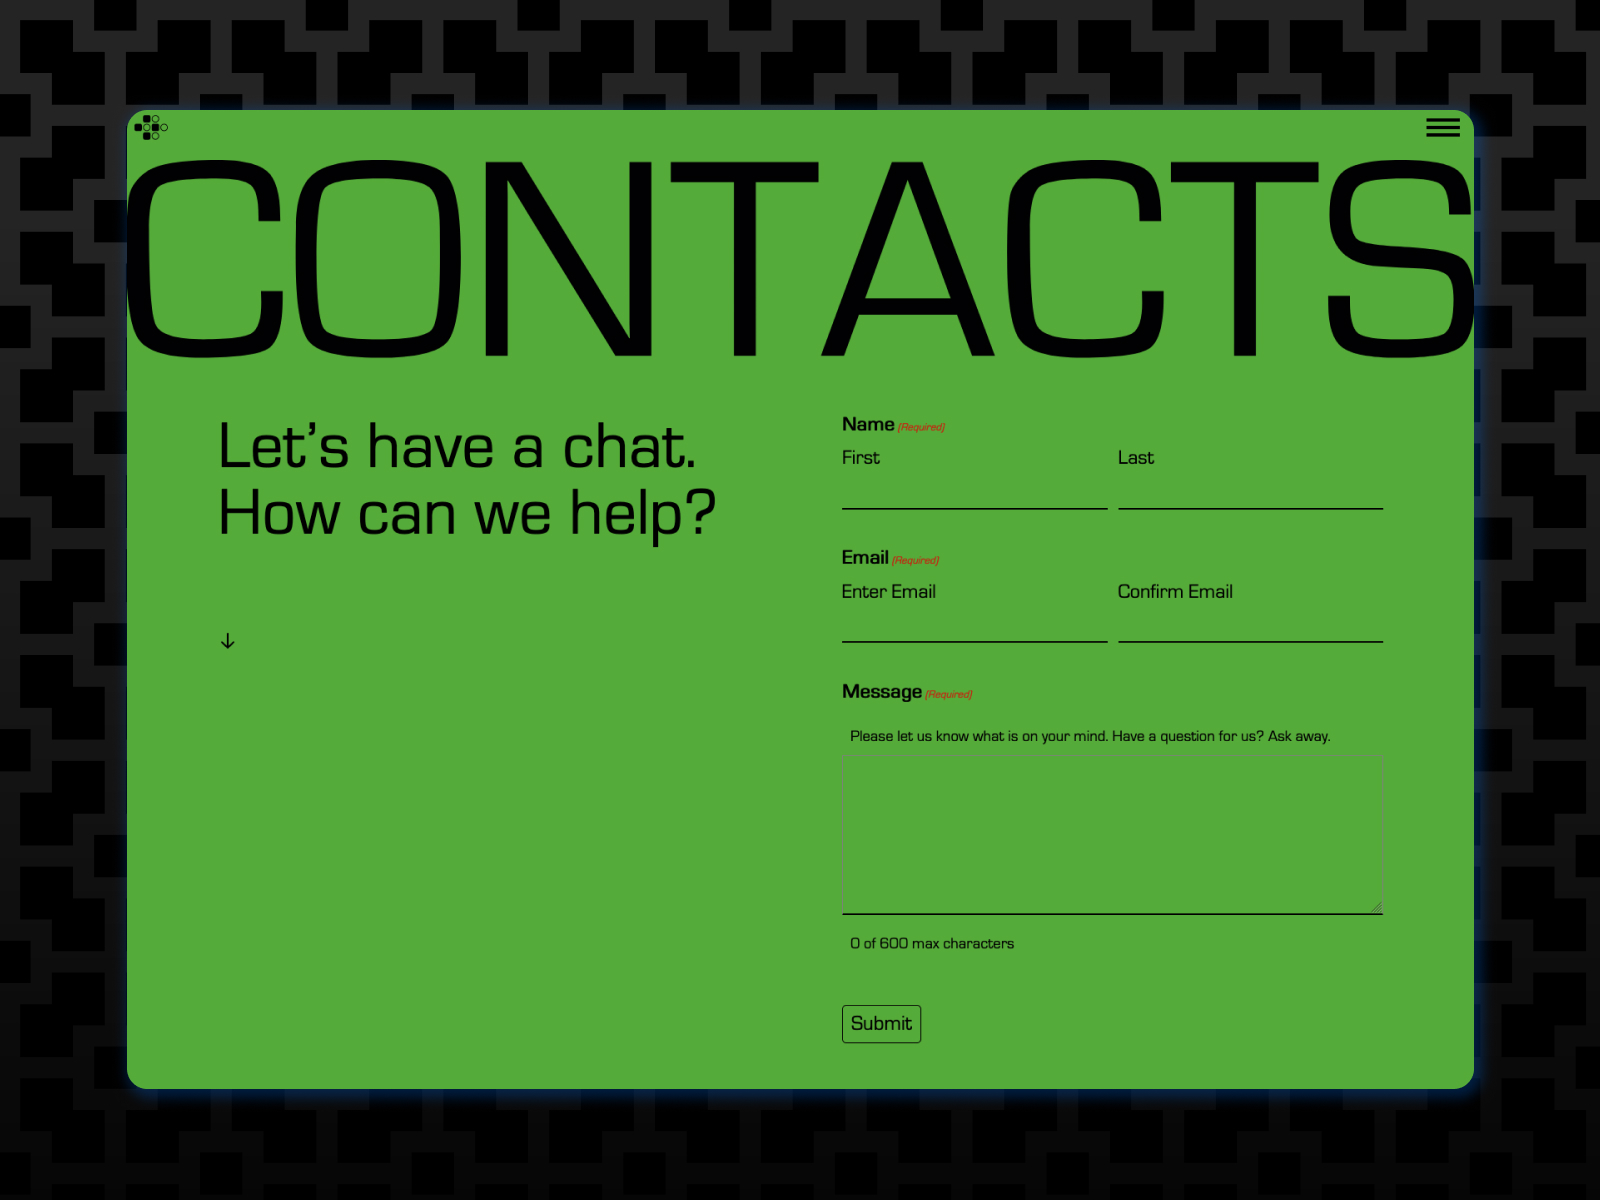 Contacts page